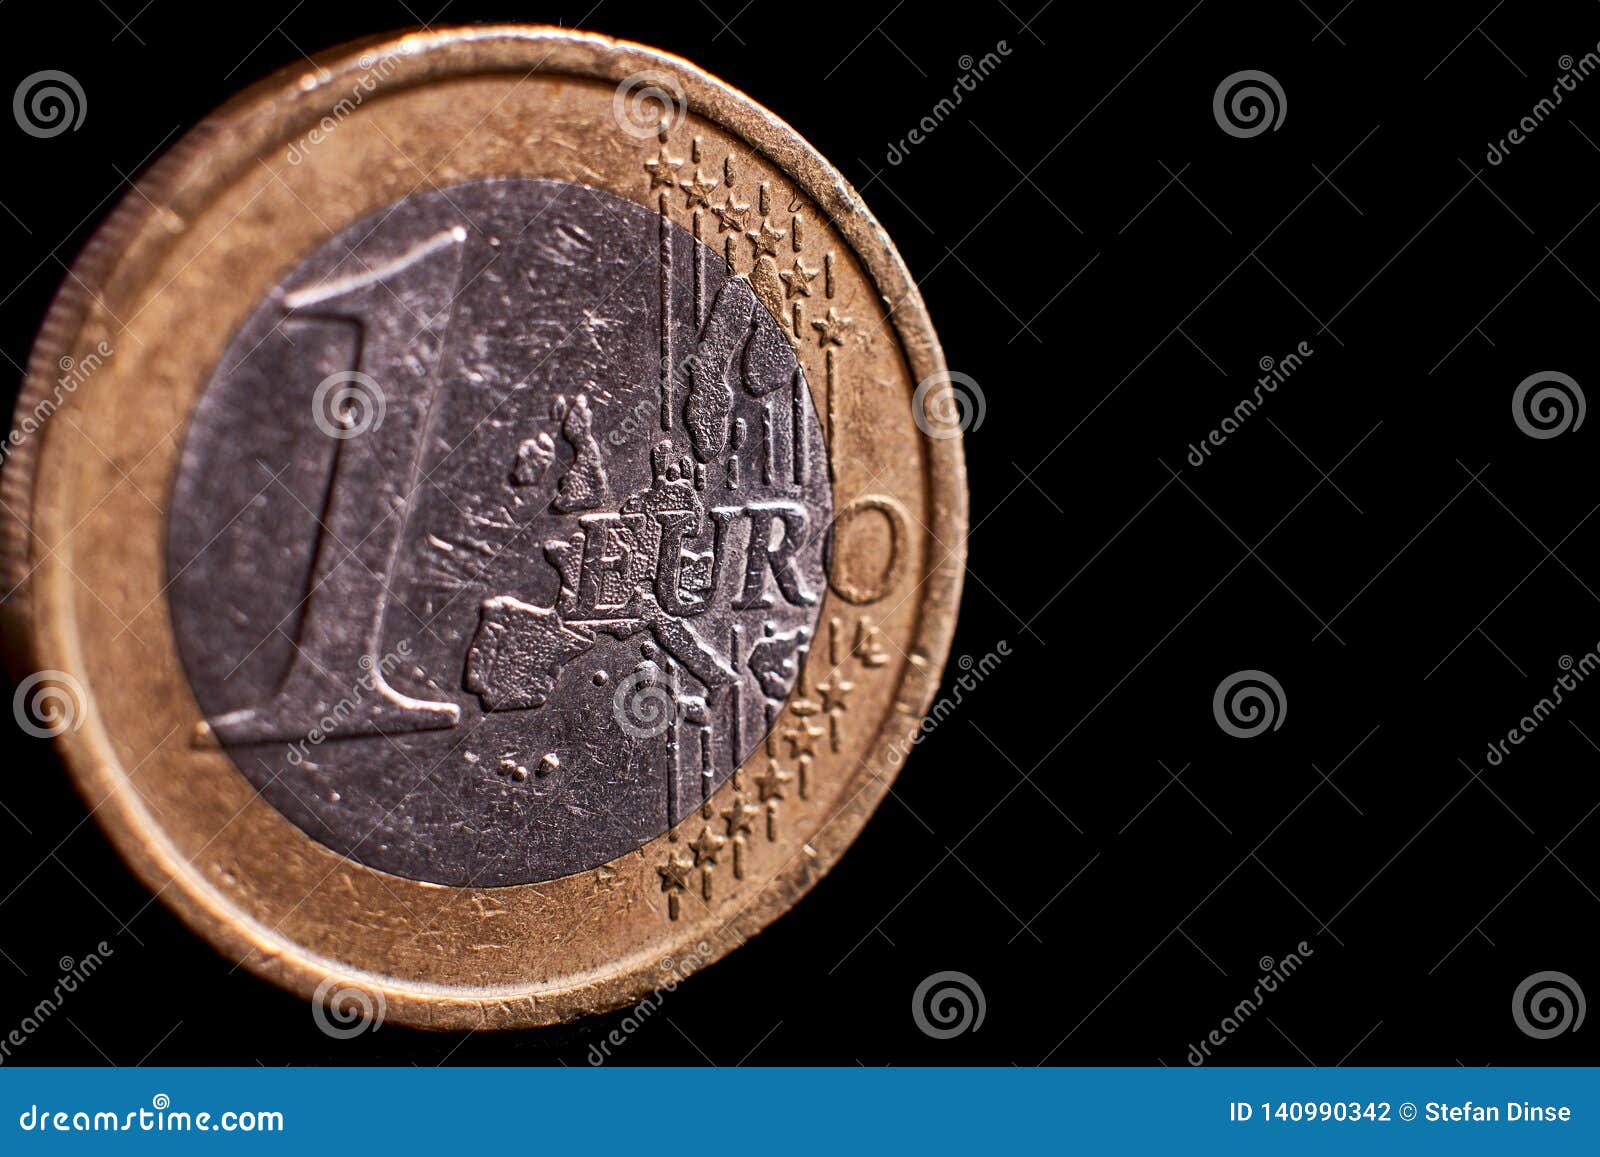 one euro coin  close up